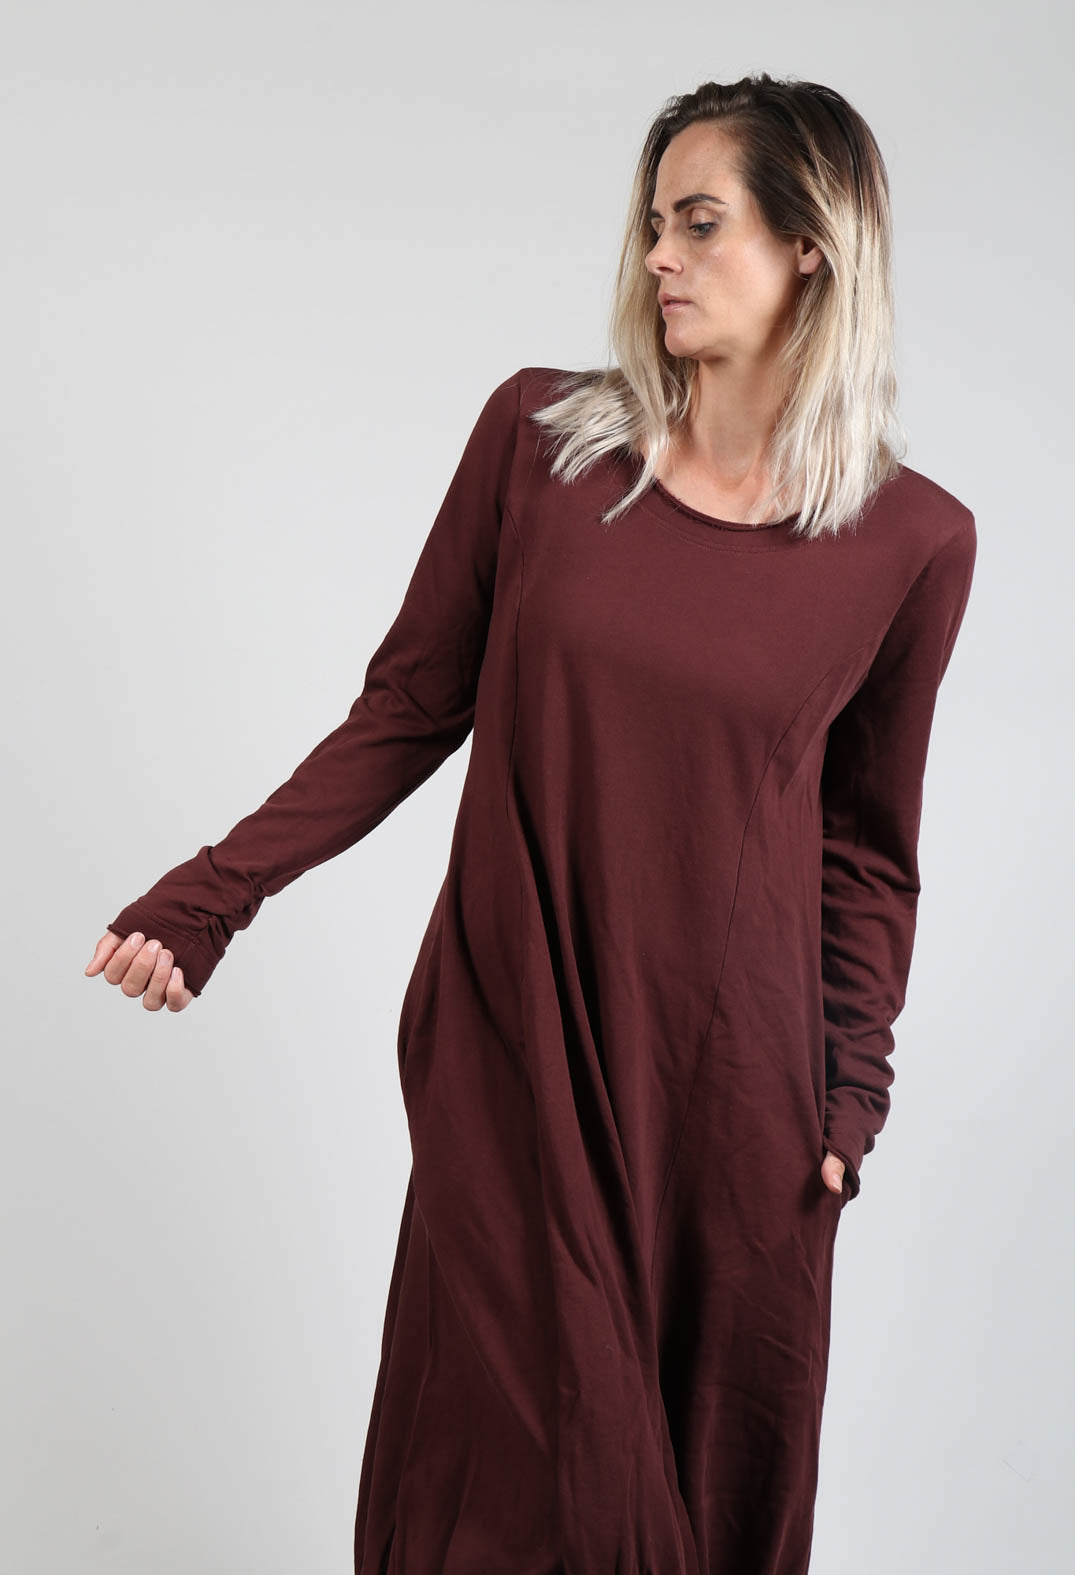 Long Sleeve Dress with Gathered Hem in Wood